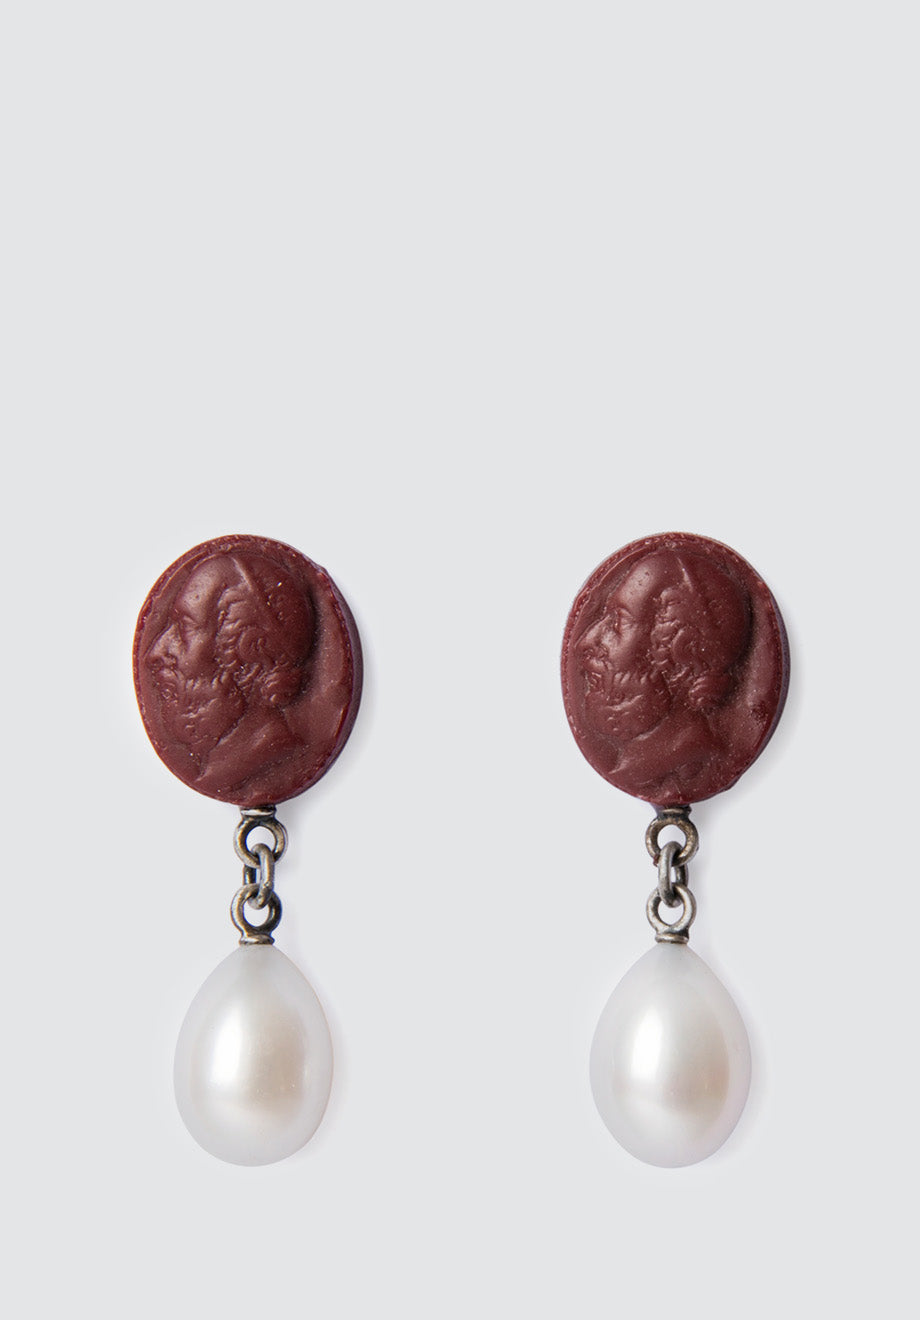 Contemporary Cameo Earrings with Pearl Drop